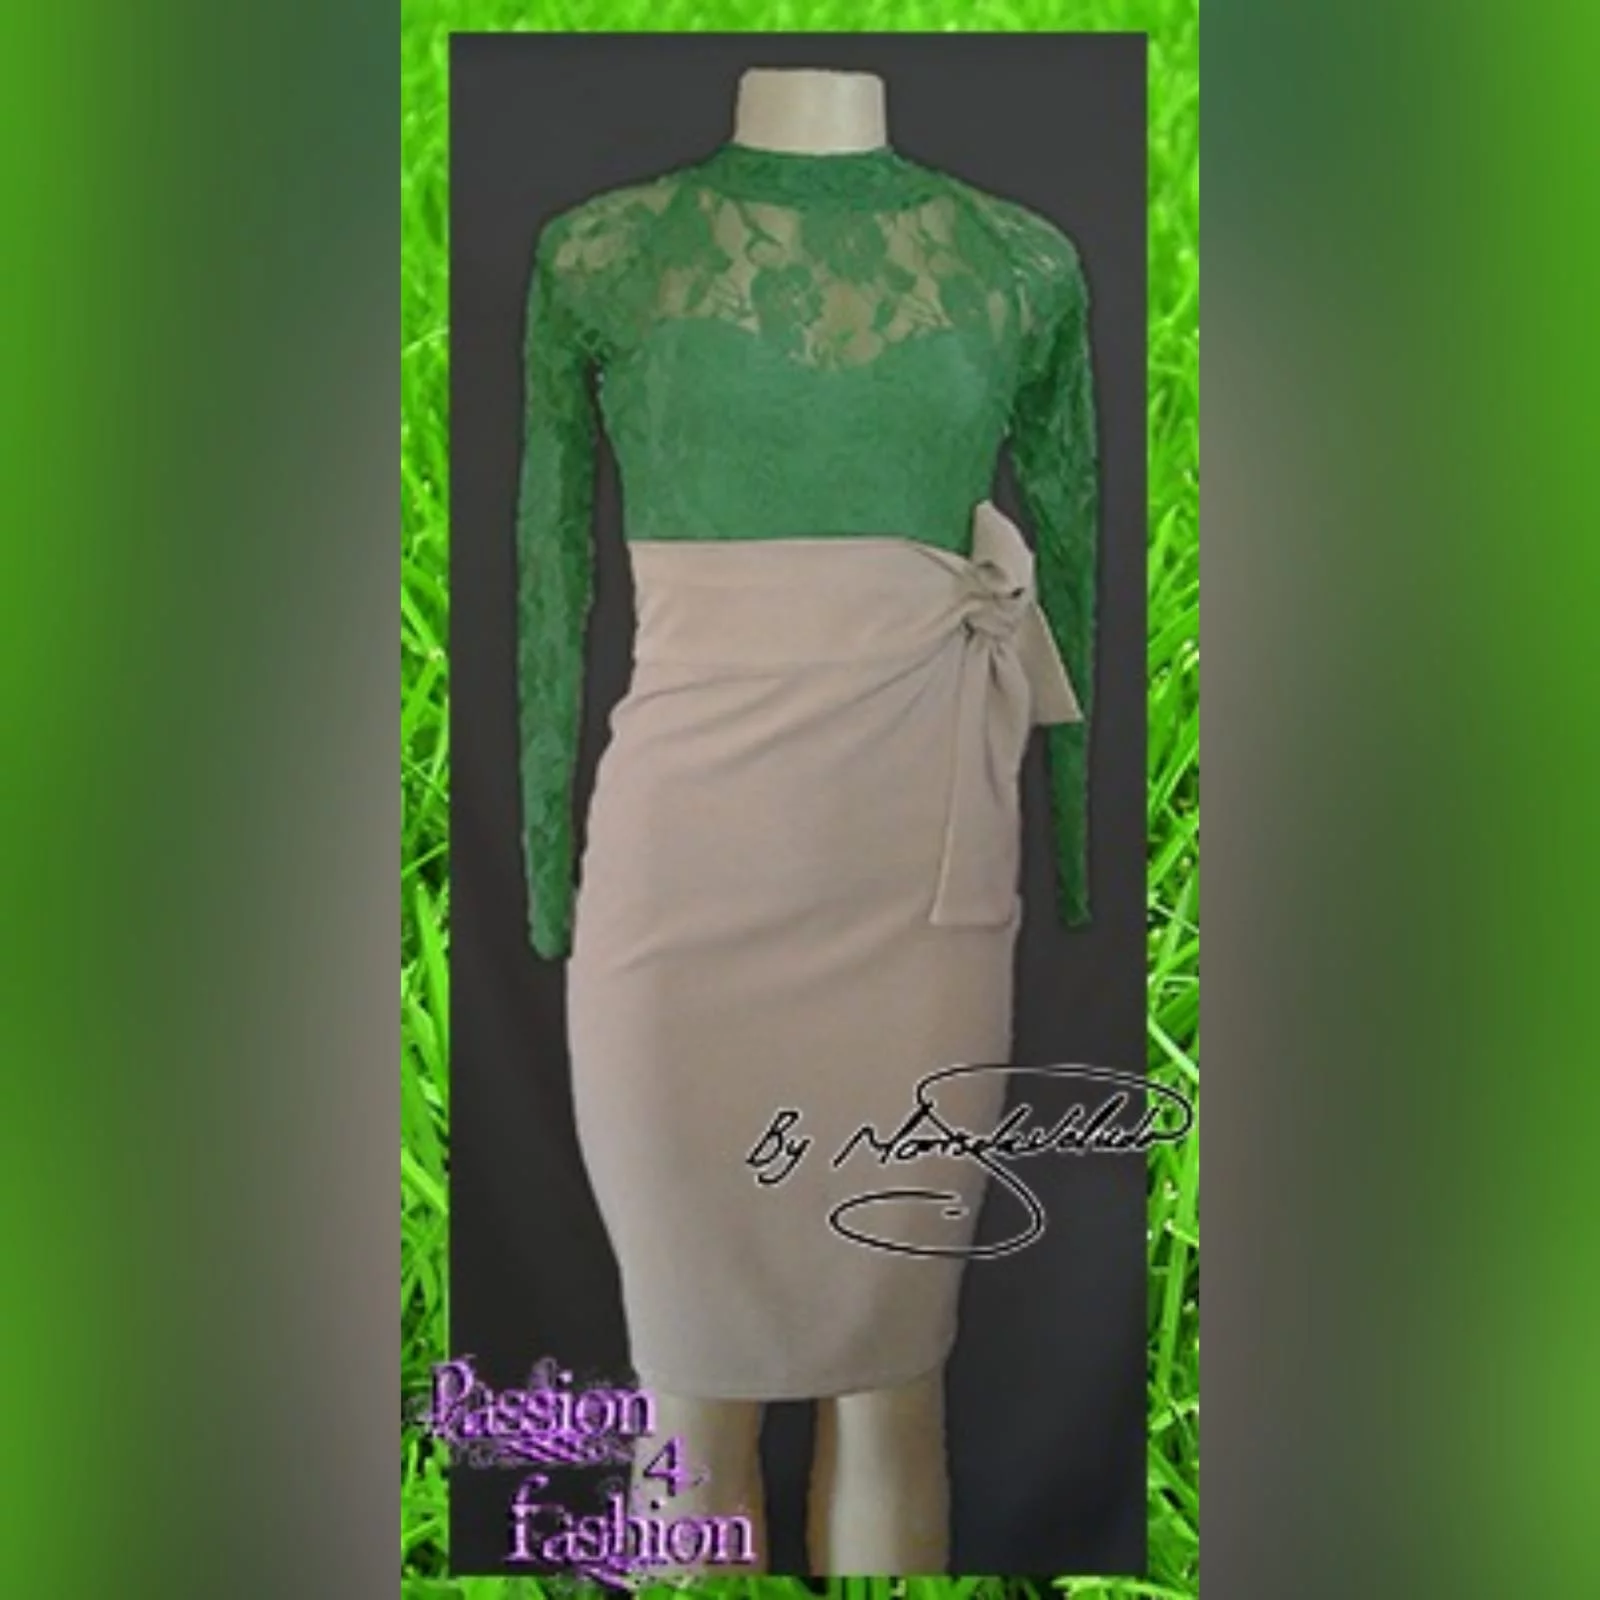 2 piece beige and green smart casual outfit 1 2 piece beige and green smart casual outfit. A pencil skirt with a tie-up waistband. With a lace top with long sleeve.